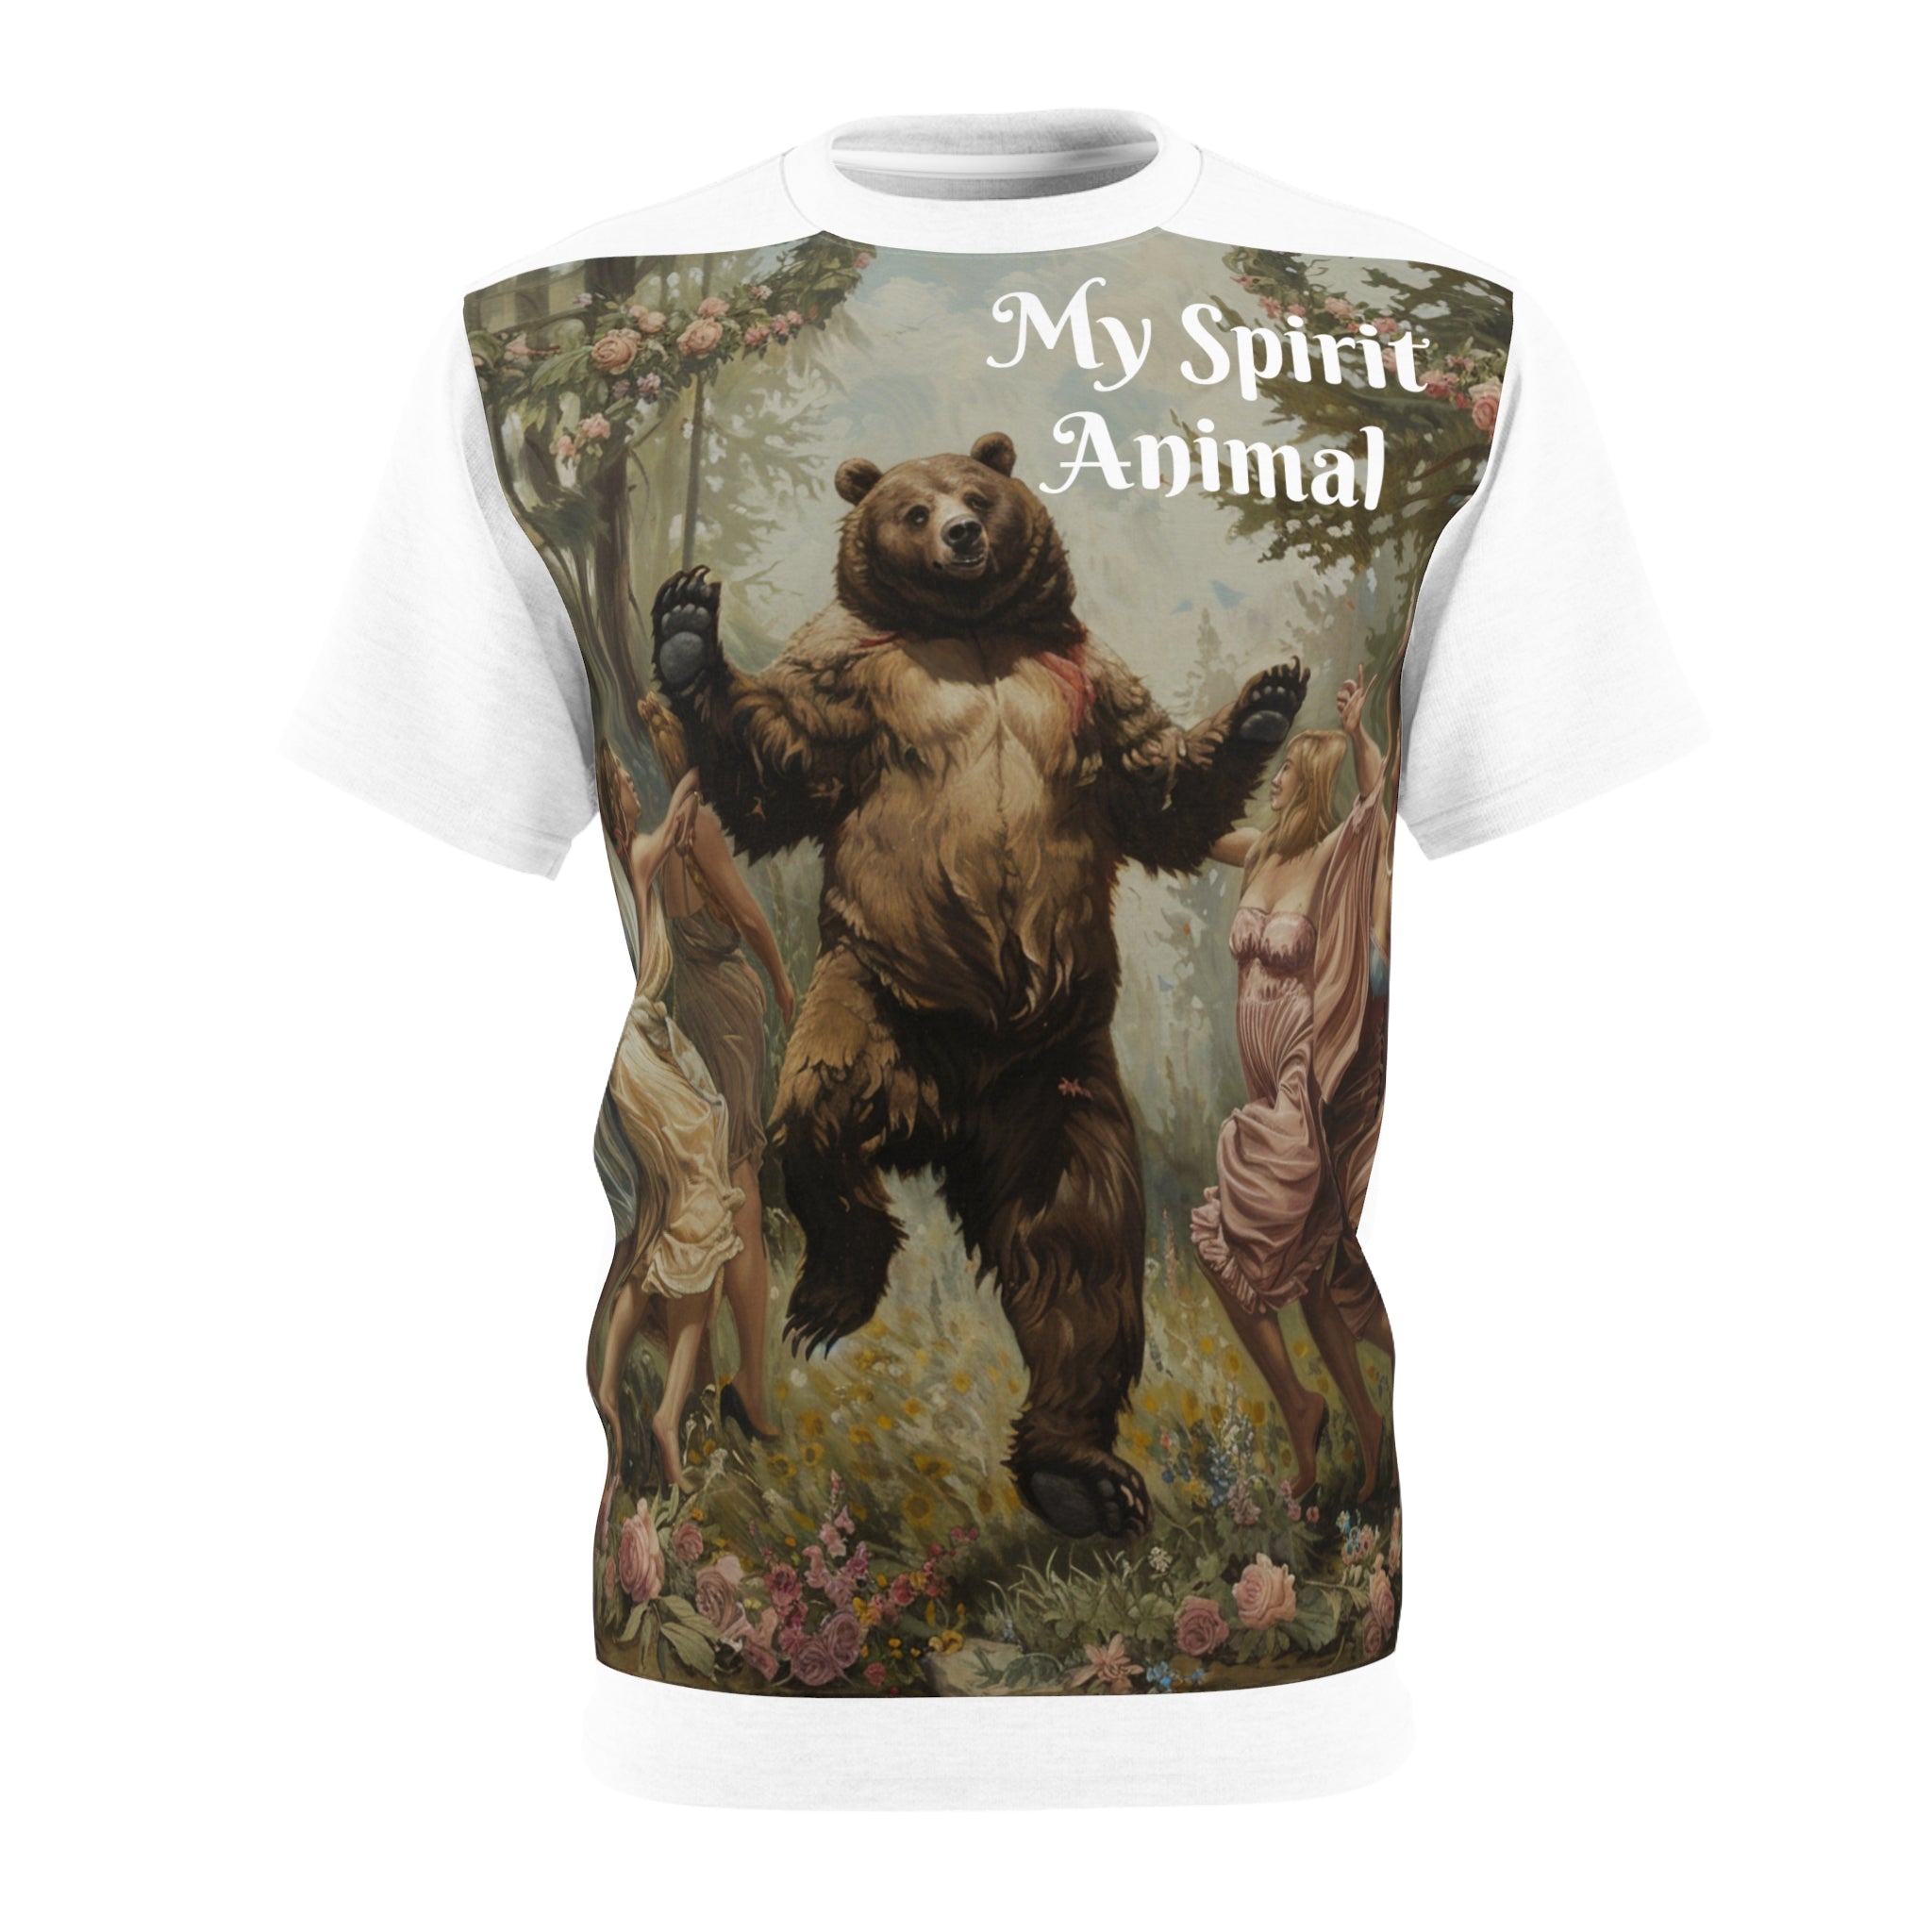 The image features a vibrant and artistically rich unisex tee showcasing a full-body, seamless print of a bear joyfully interacting with nymphs in a lush forest setting. The tee's cut and sew construction ensures the scene wraps beautifully around the shirt, enhancing both the visual impact and the storytelling element.